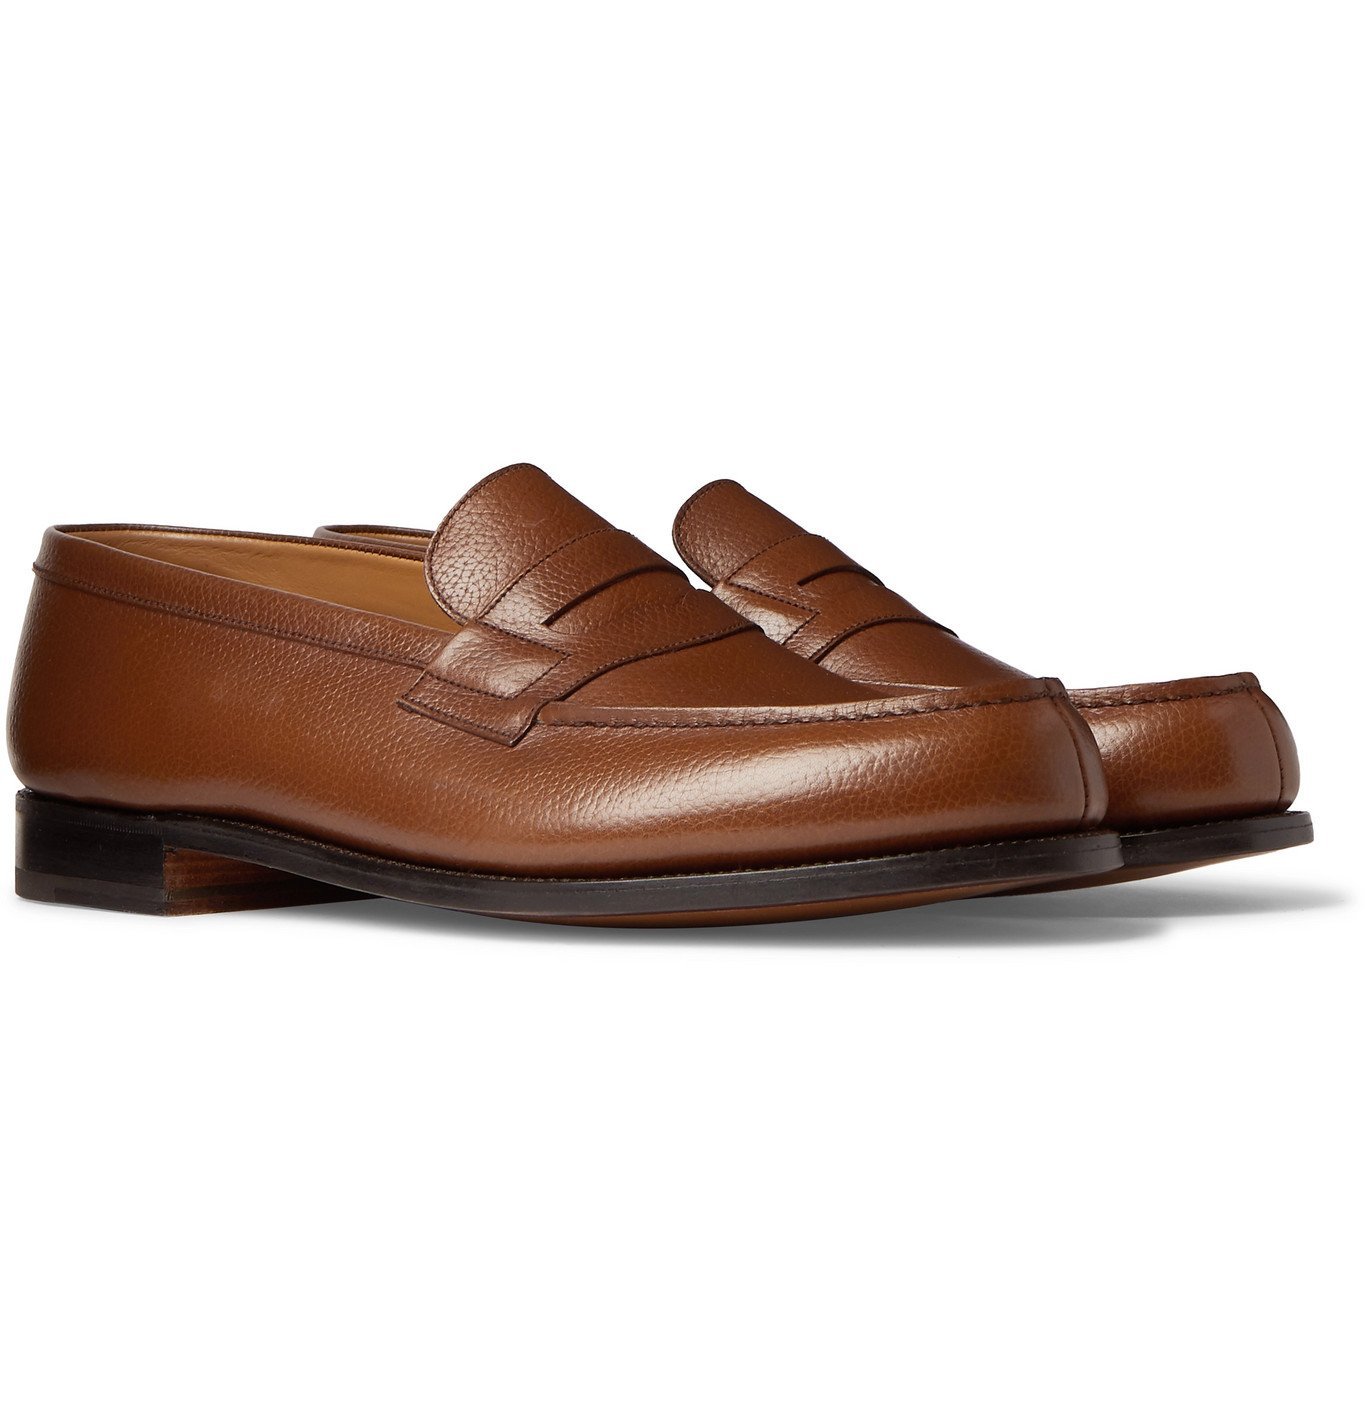 J.M. Weston - 180 Moccasin Full-Grain Leather Loafers - Brown J.M. Weston